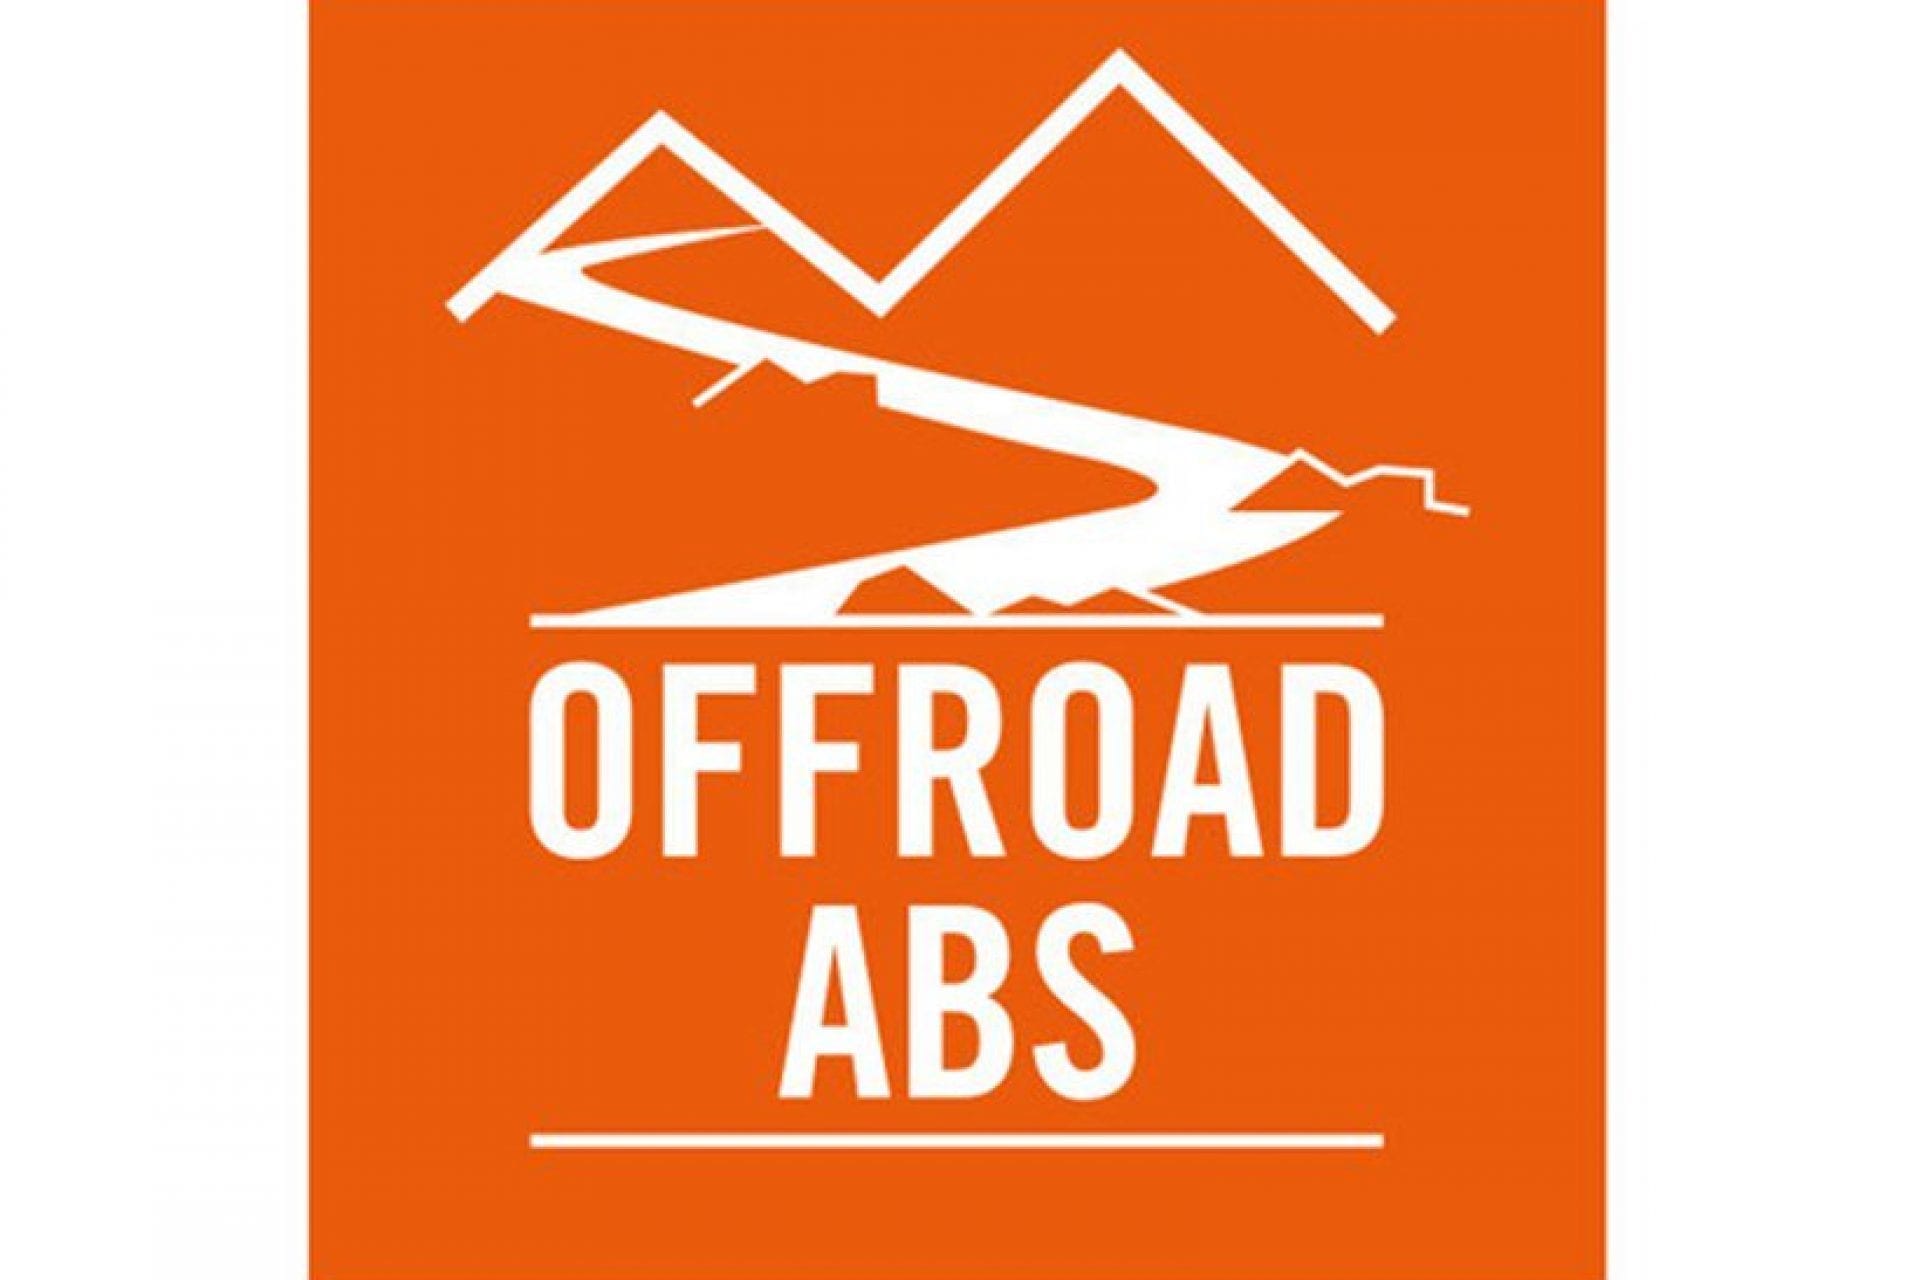 OFFROAD ABS